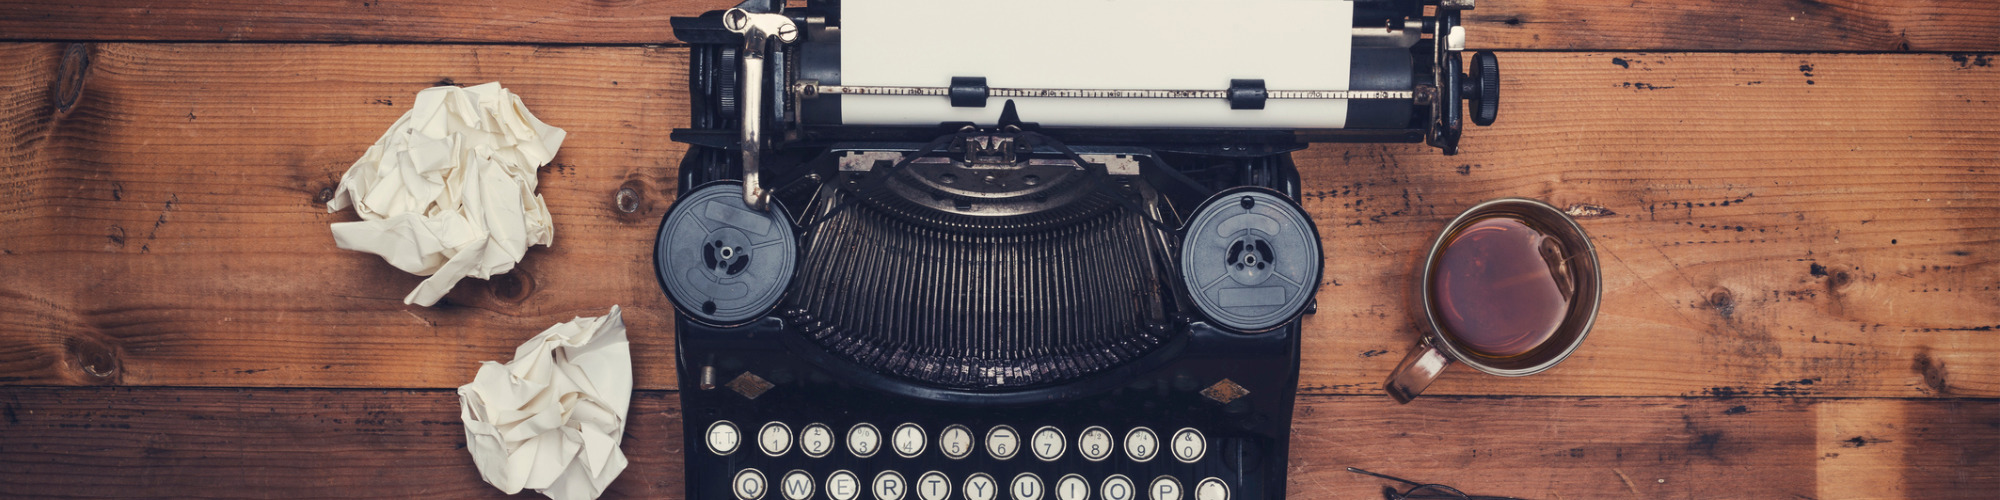 Copywriting for Beginners - How to Write Your Own Persuasive Content